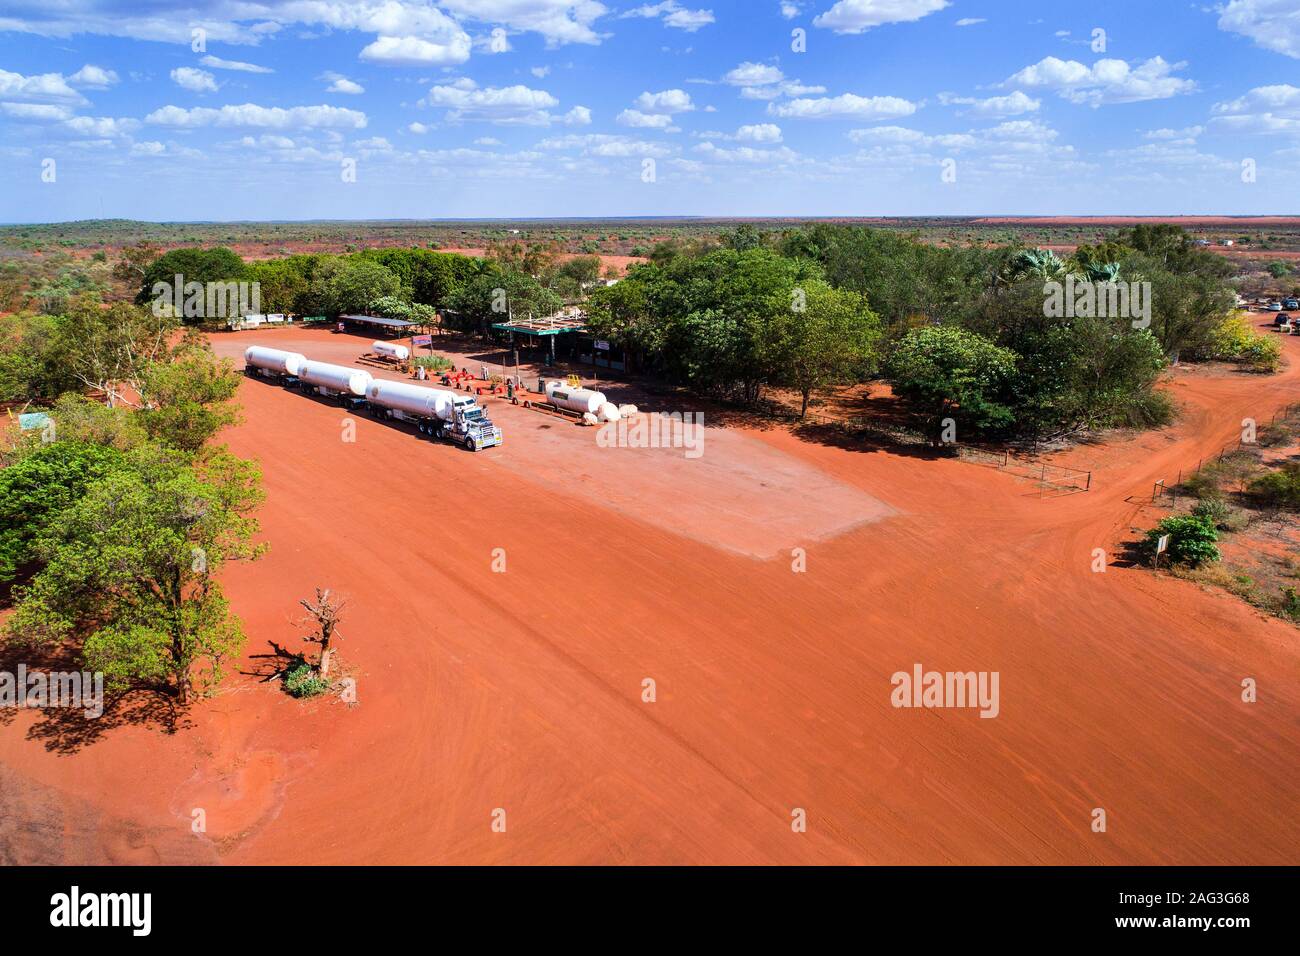 Aerial view of Sandfire outback road stop, South Kimberley, Western Australia Stock Photo